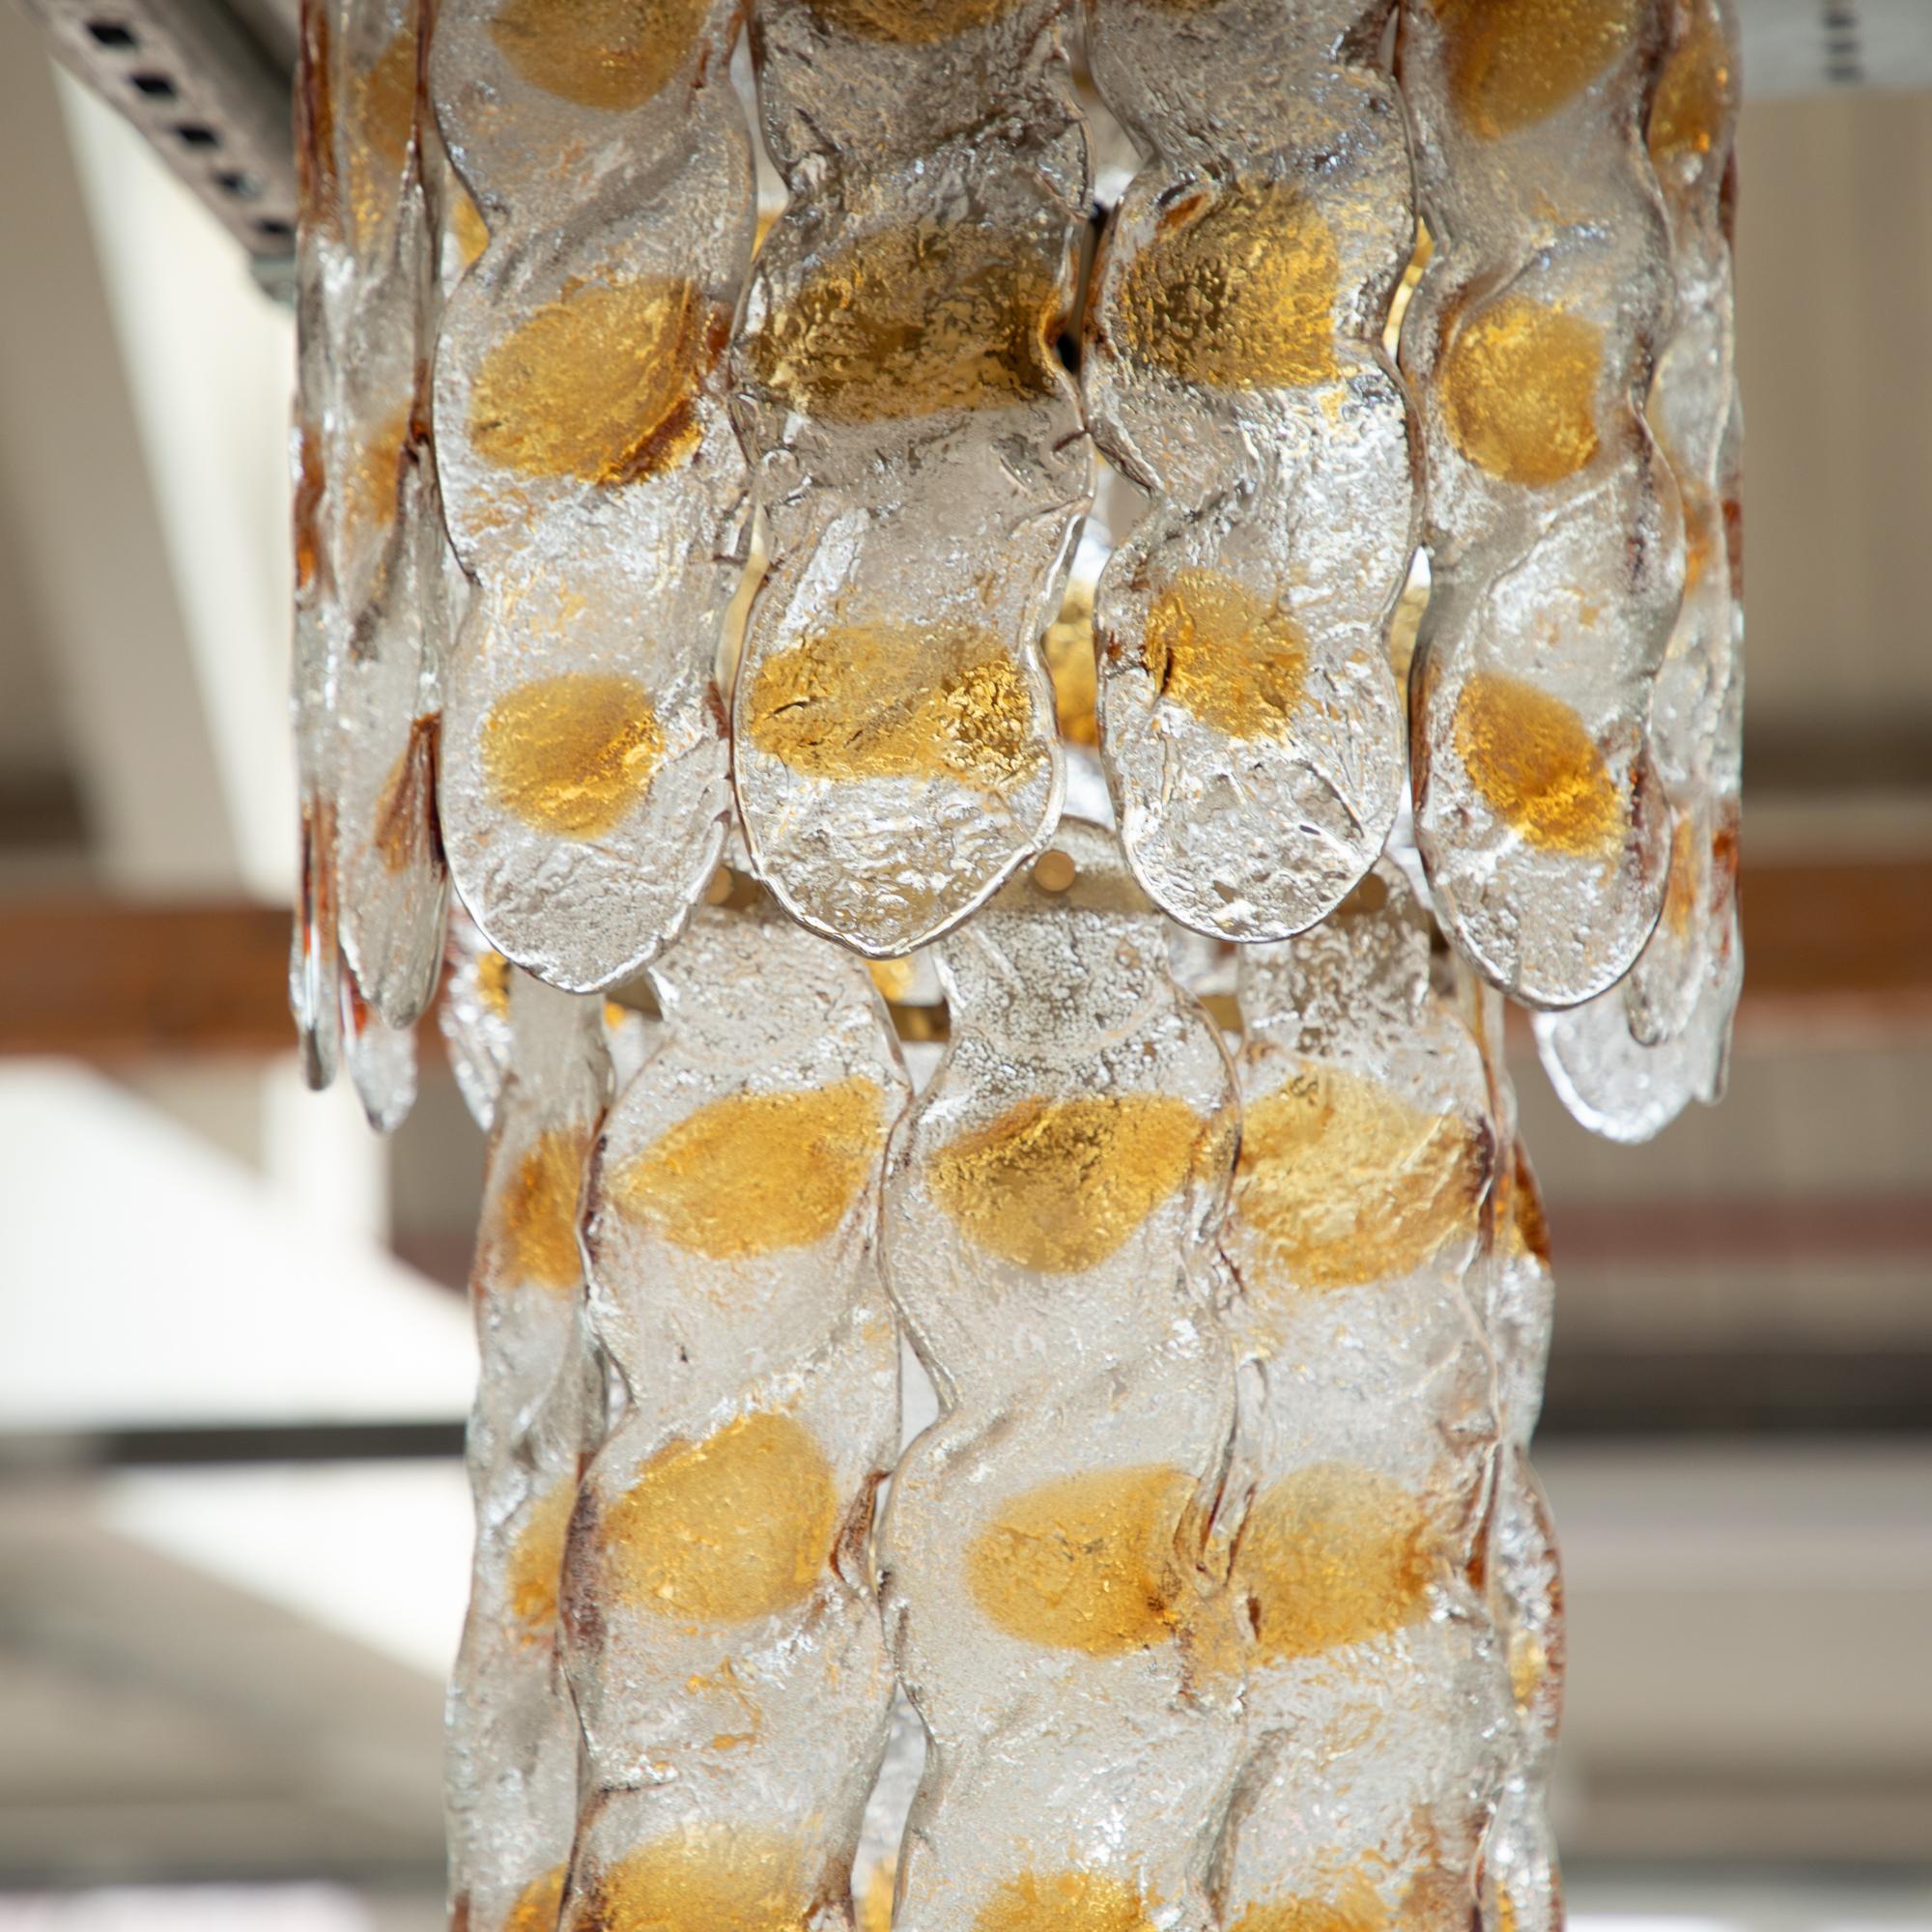 Vintage 1970s Murano glass chandelier, amber and transparent glass plates. The soft curvaceous plates have an opaque textured finish with amber glass details where the plates dip and undulate. The overall effect once hung is a soft and mesmerising